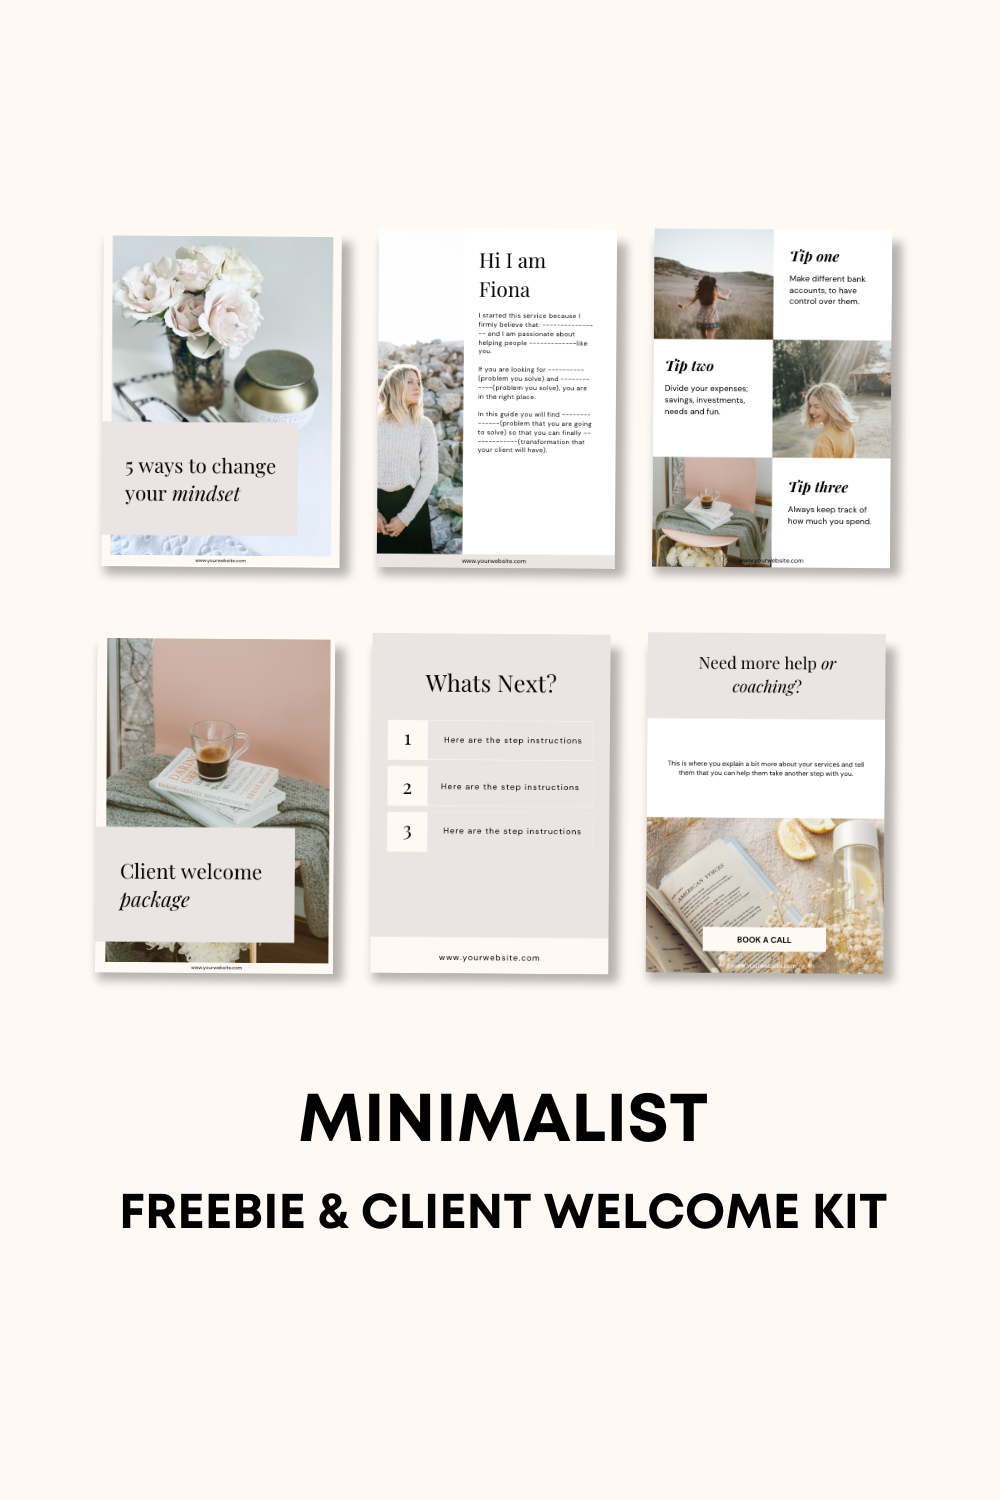 CLIENT welcome packet minimalist template